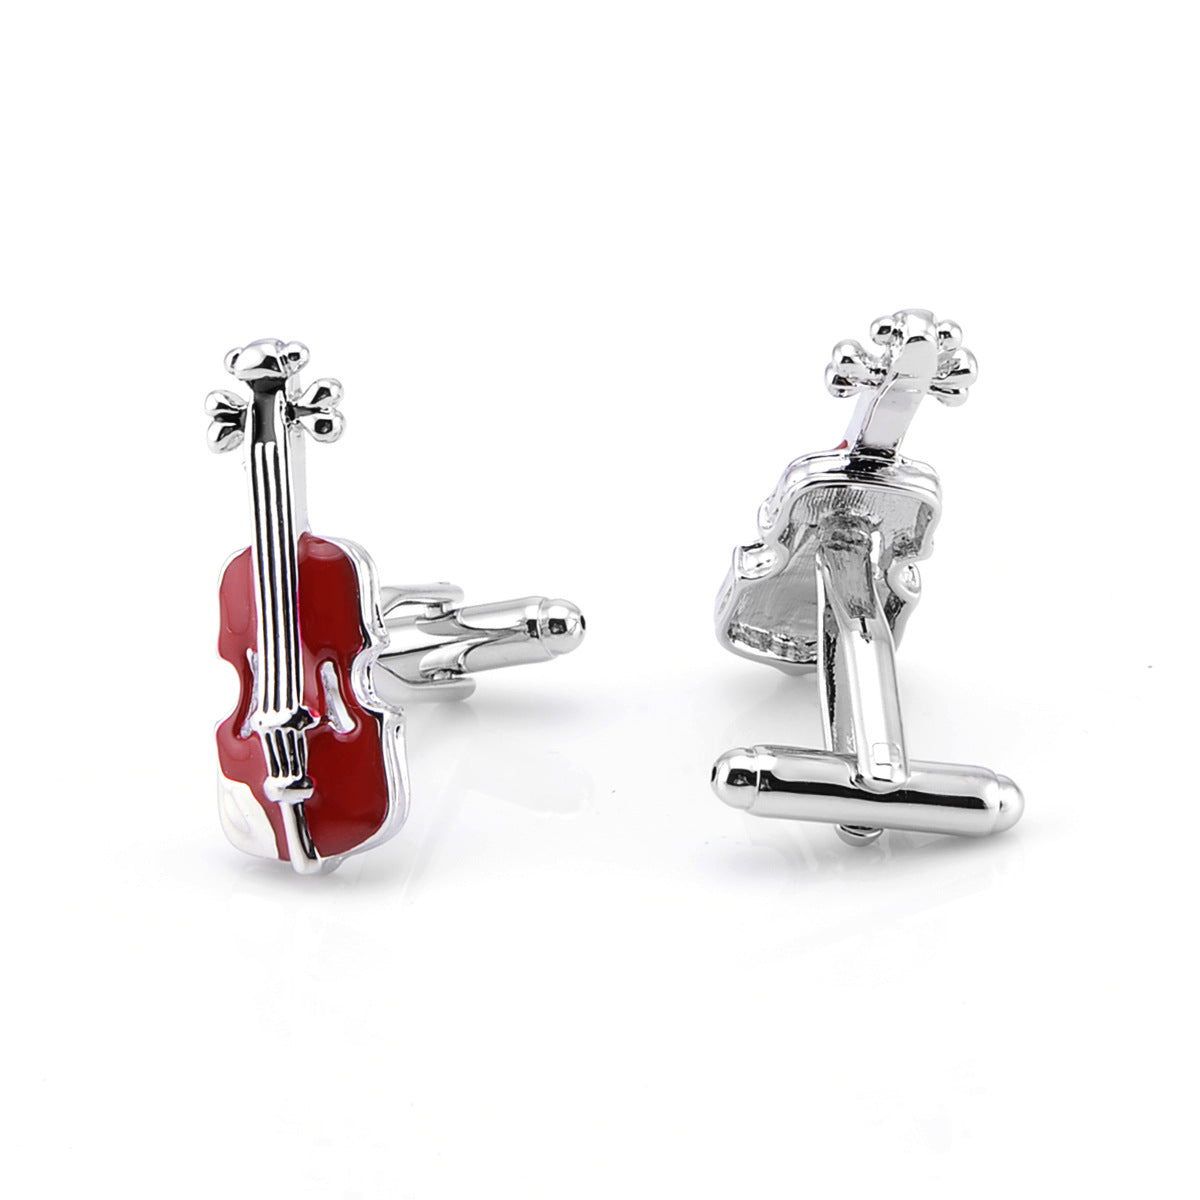 French High Quality Red Violin Cuff Music